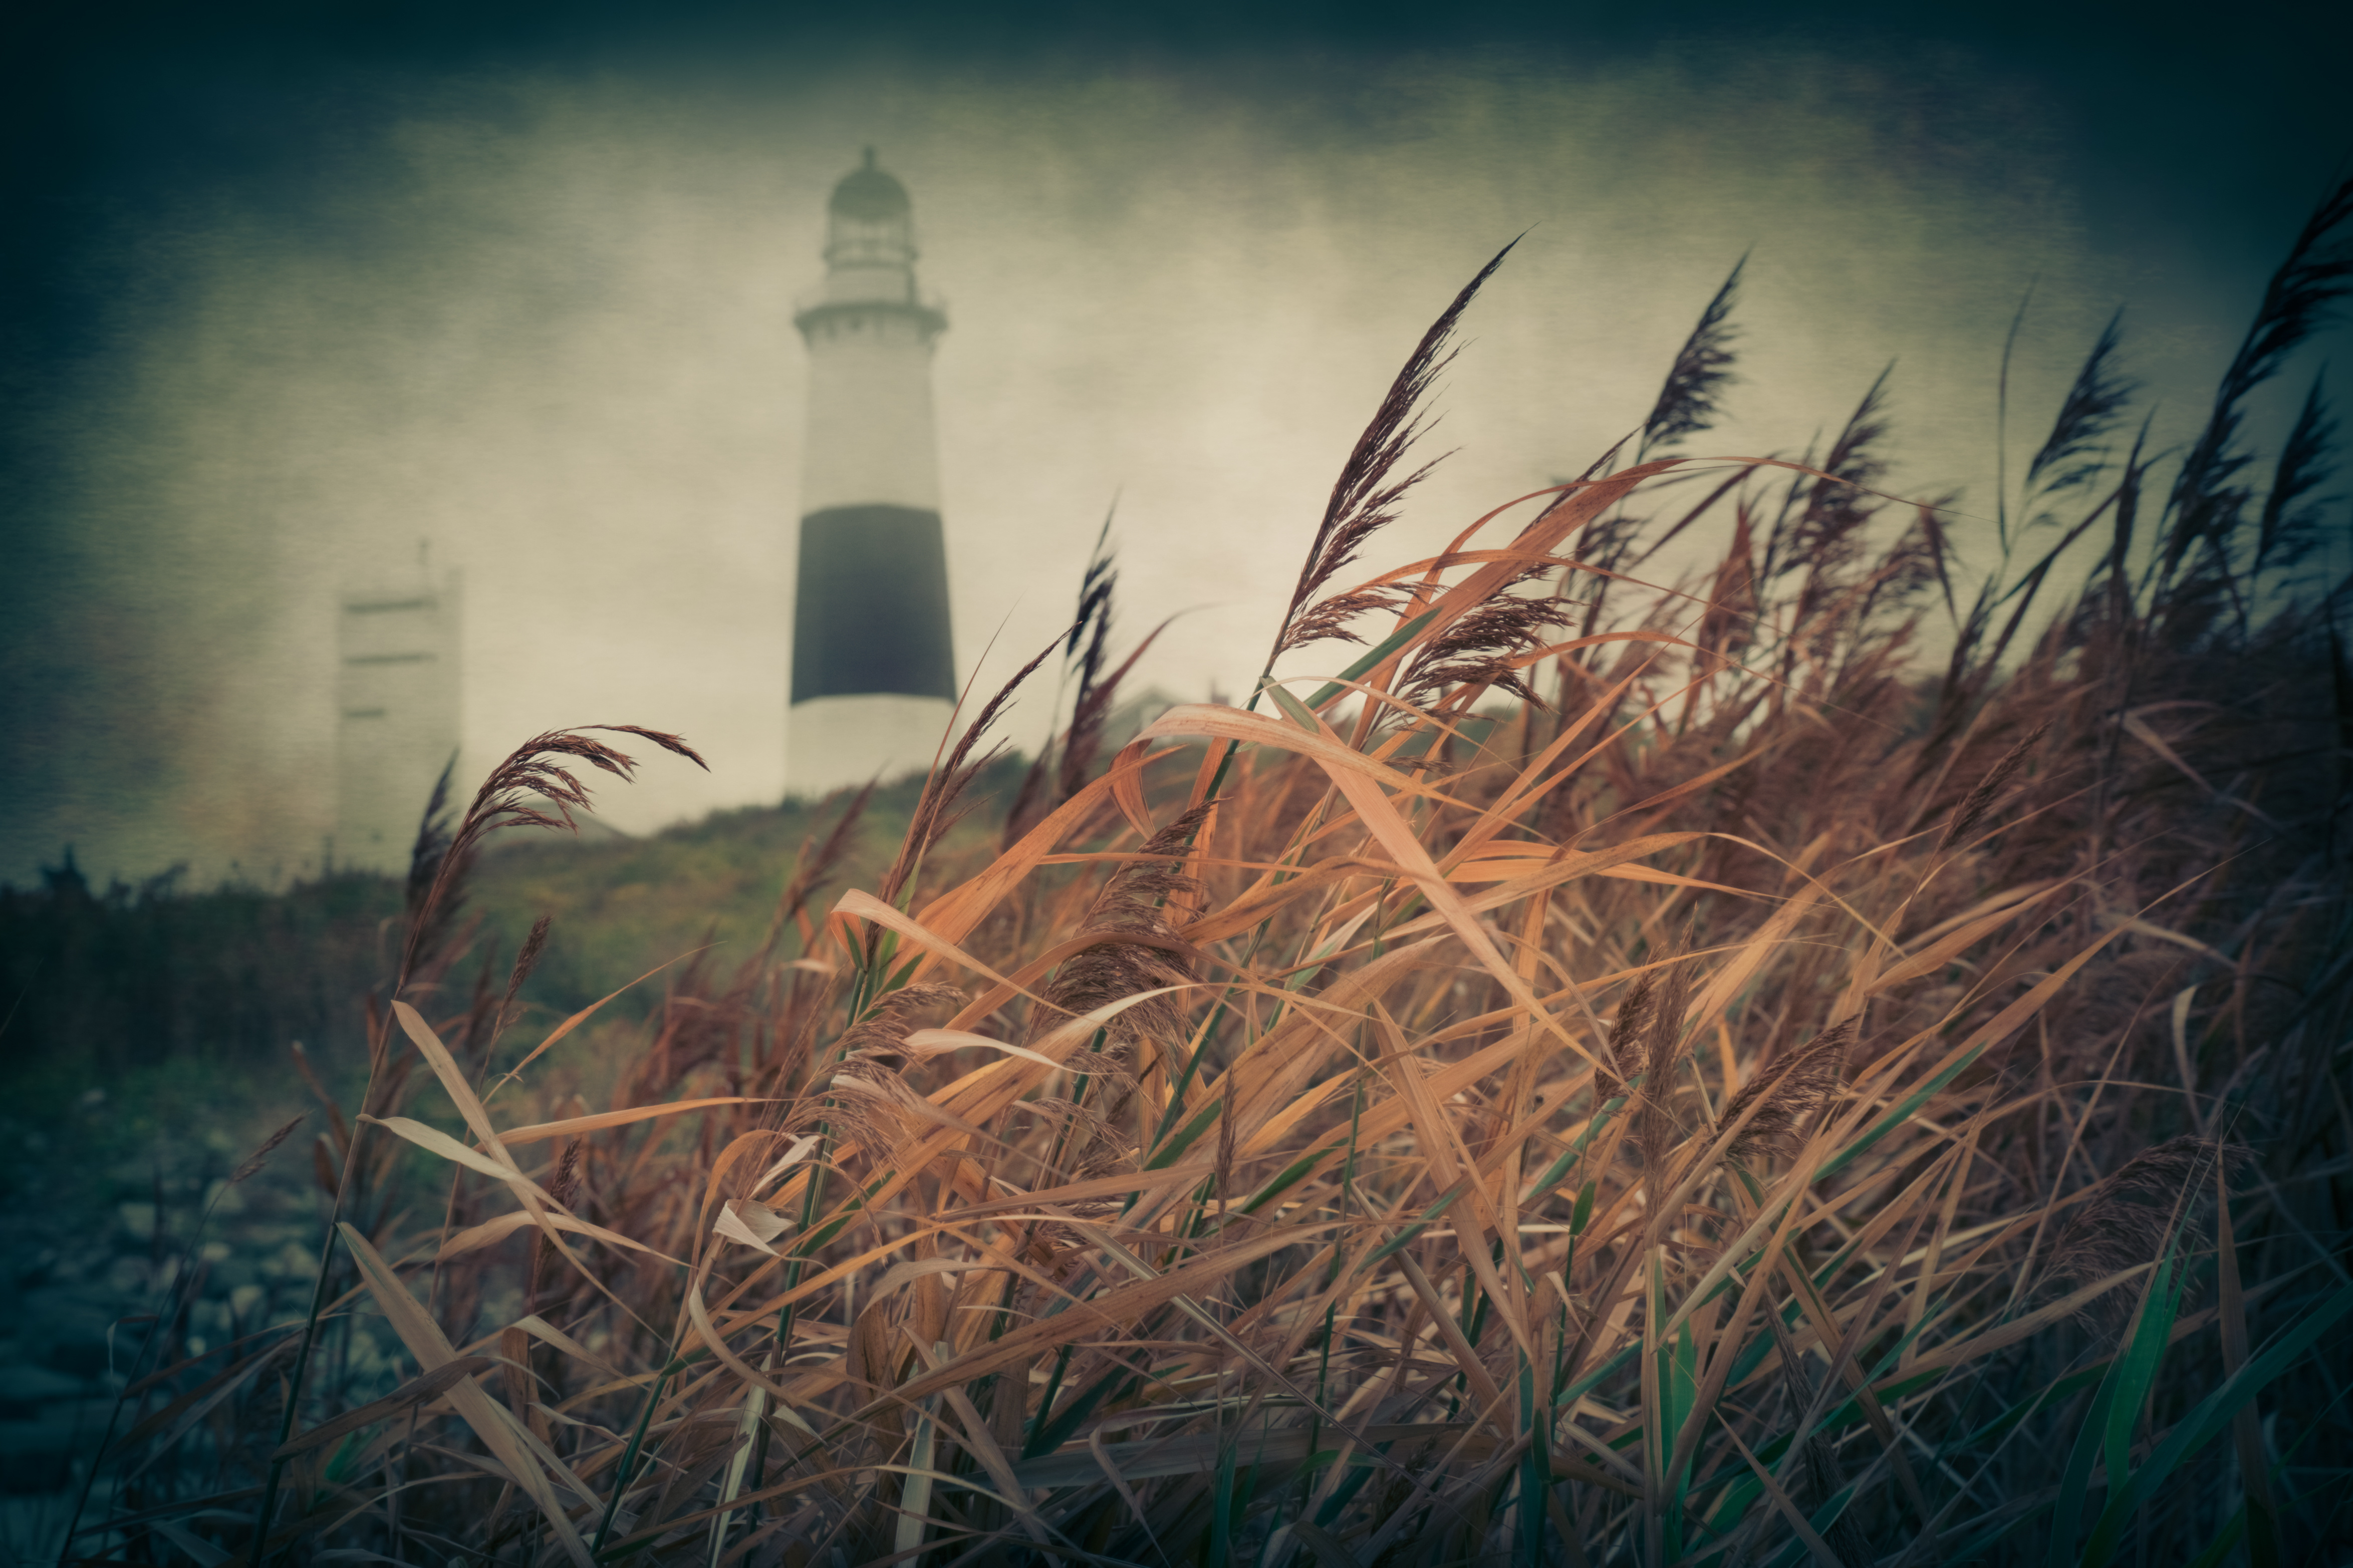 Winter overcast view of downtown Montauk with Lighthouse in background behind foliage.